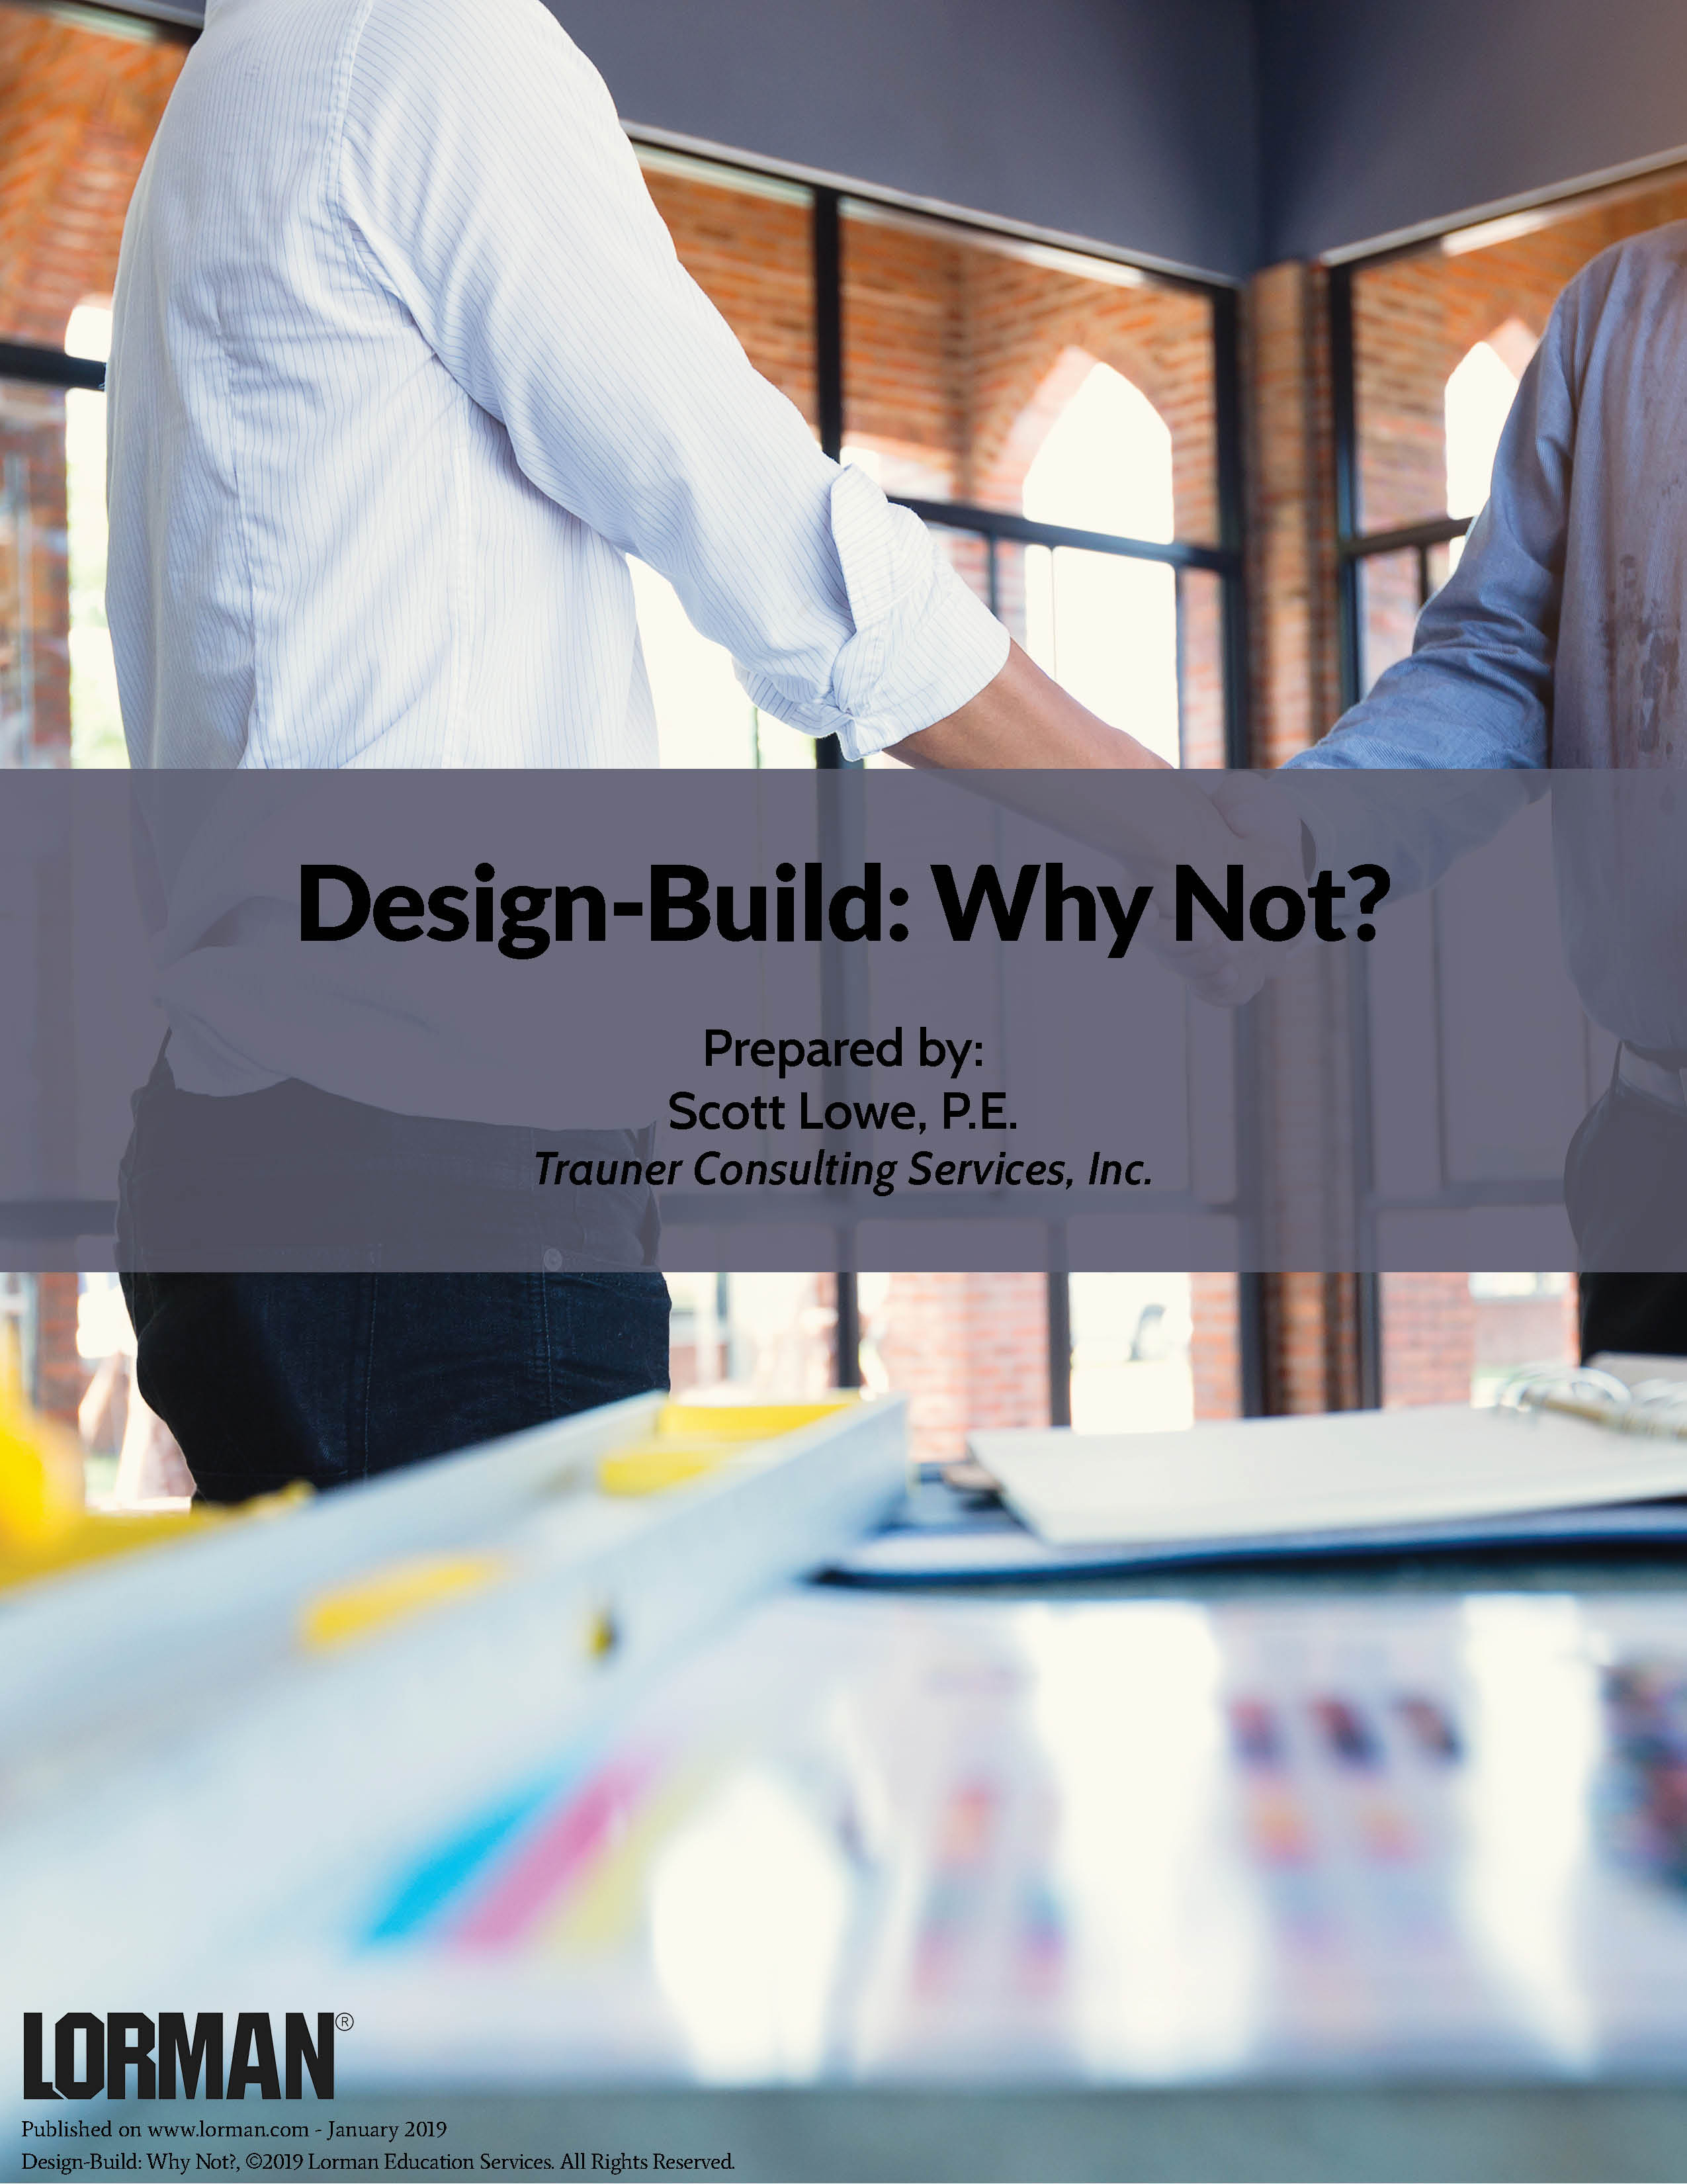 Design-Build: Why Not?